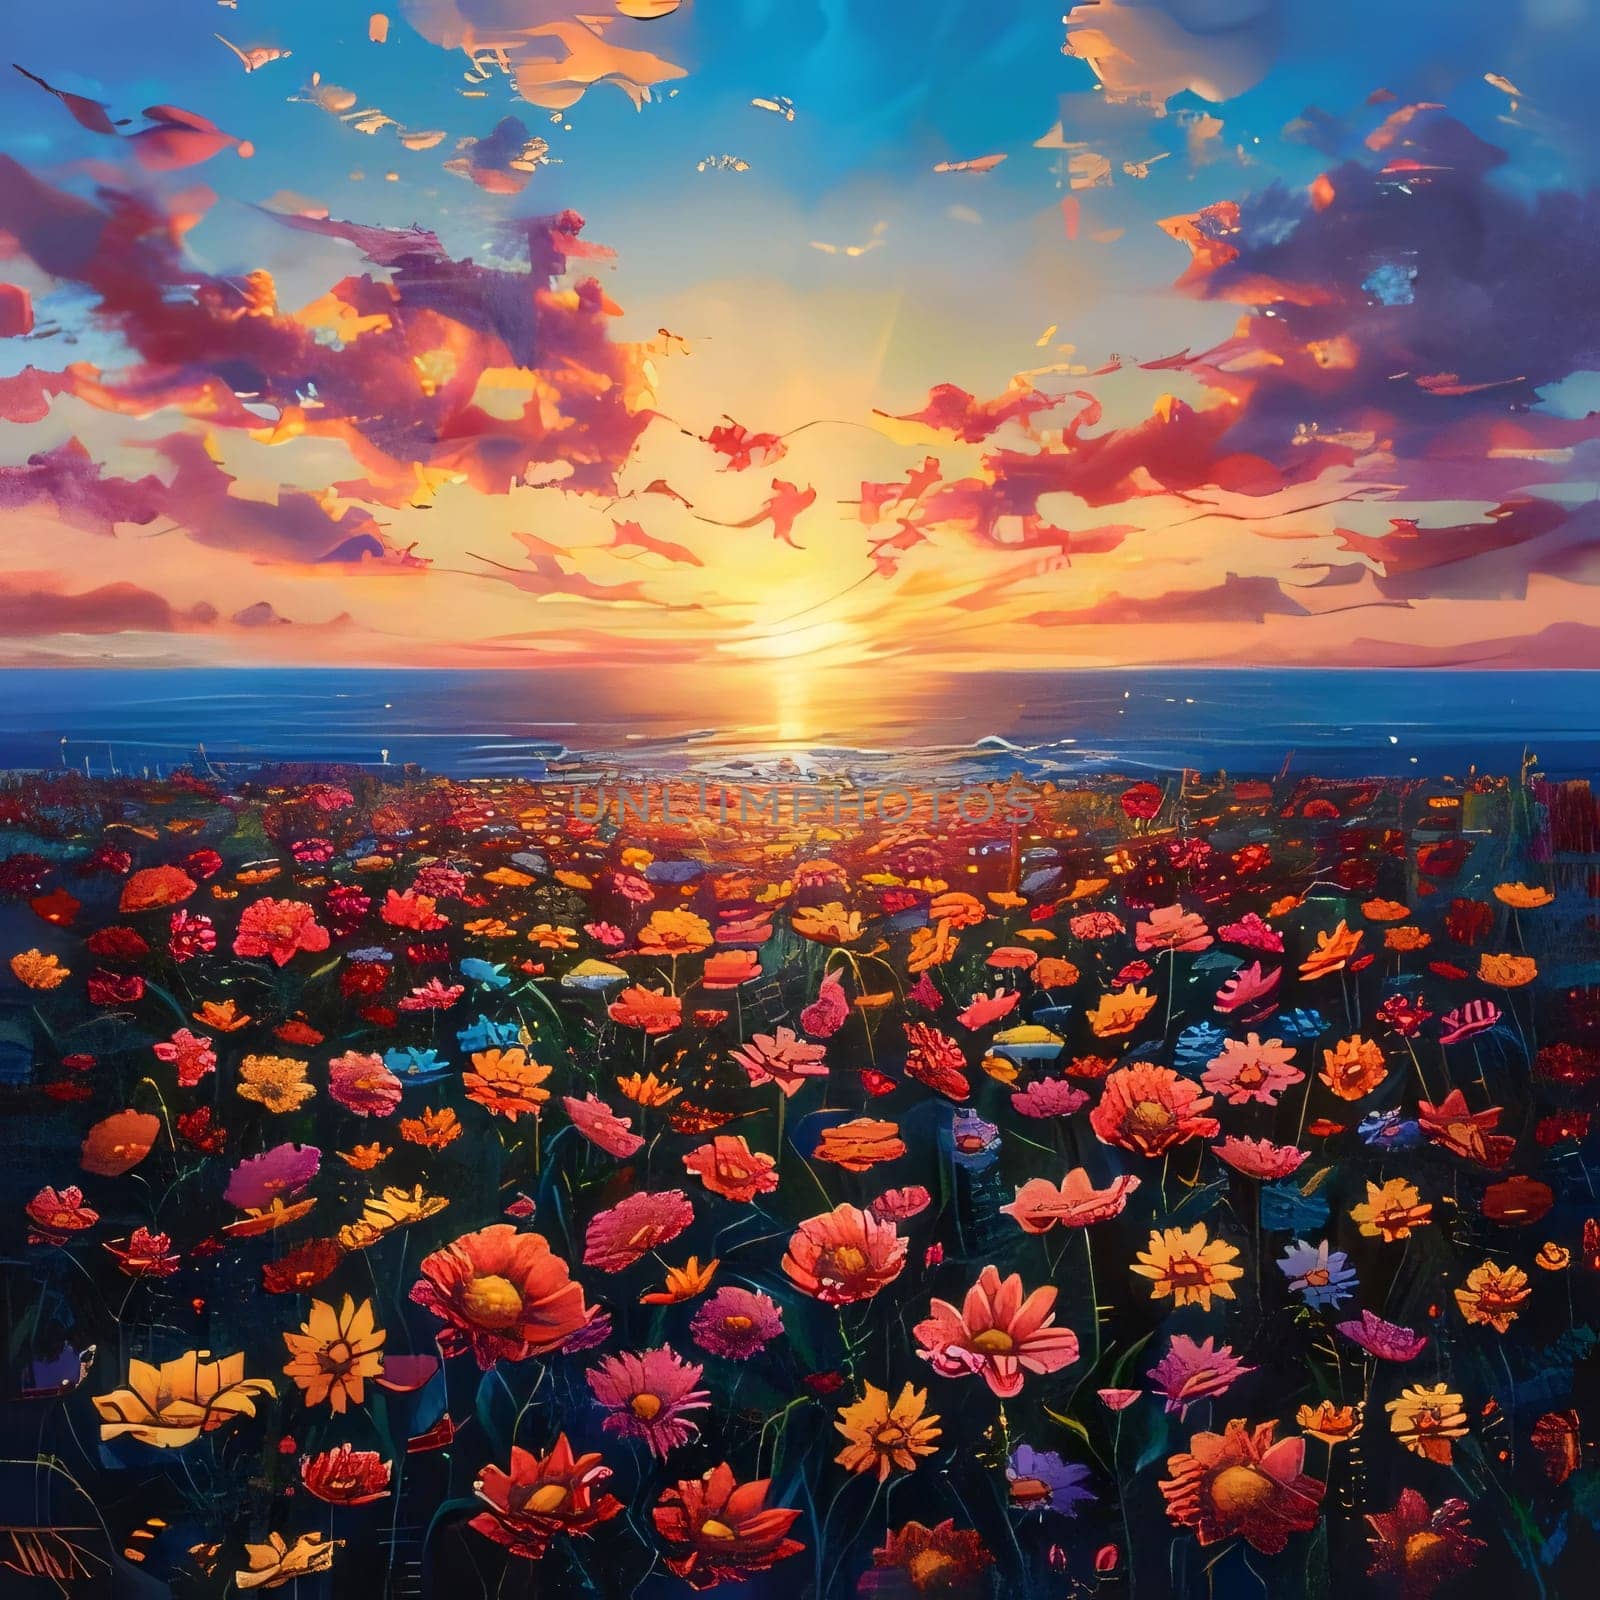 Illustration of a field full of colorful orange, pink red Flowers at sunset. Flowering flowers, a symbol of spring, new life. A joyful time of nature waking up to life.